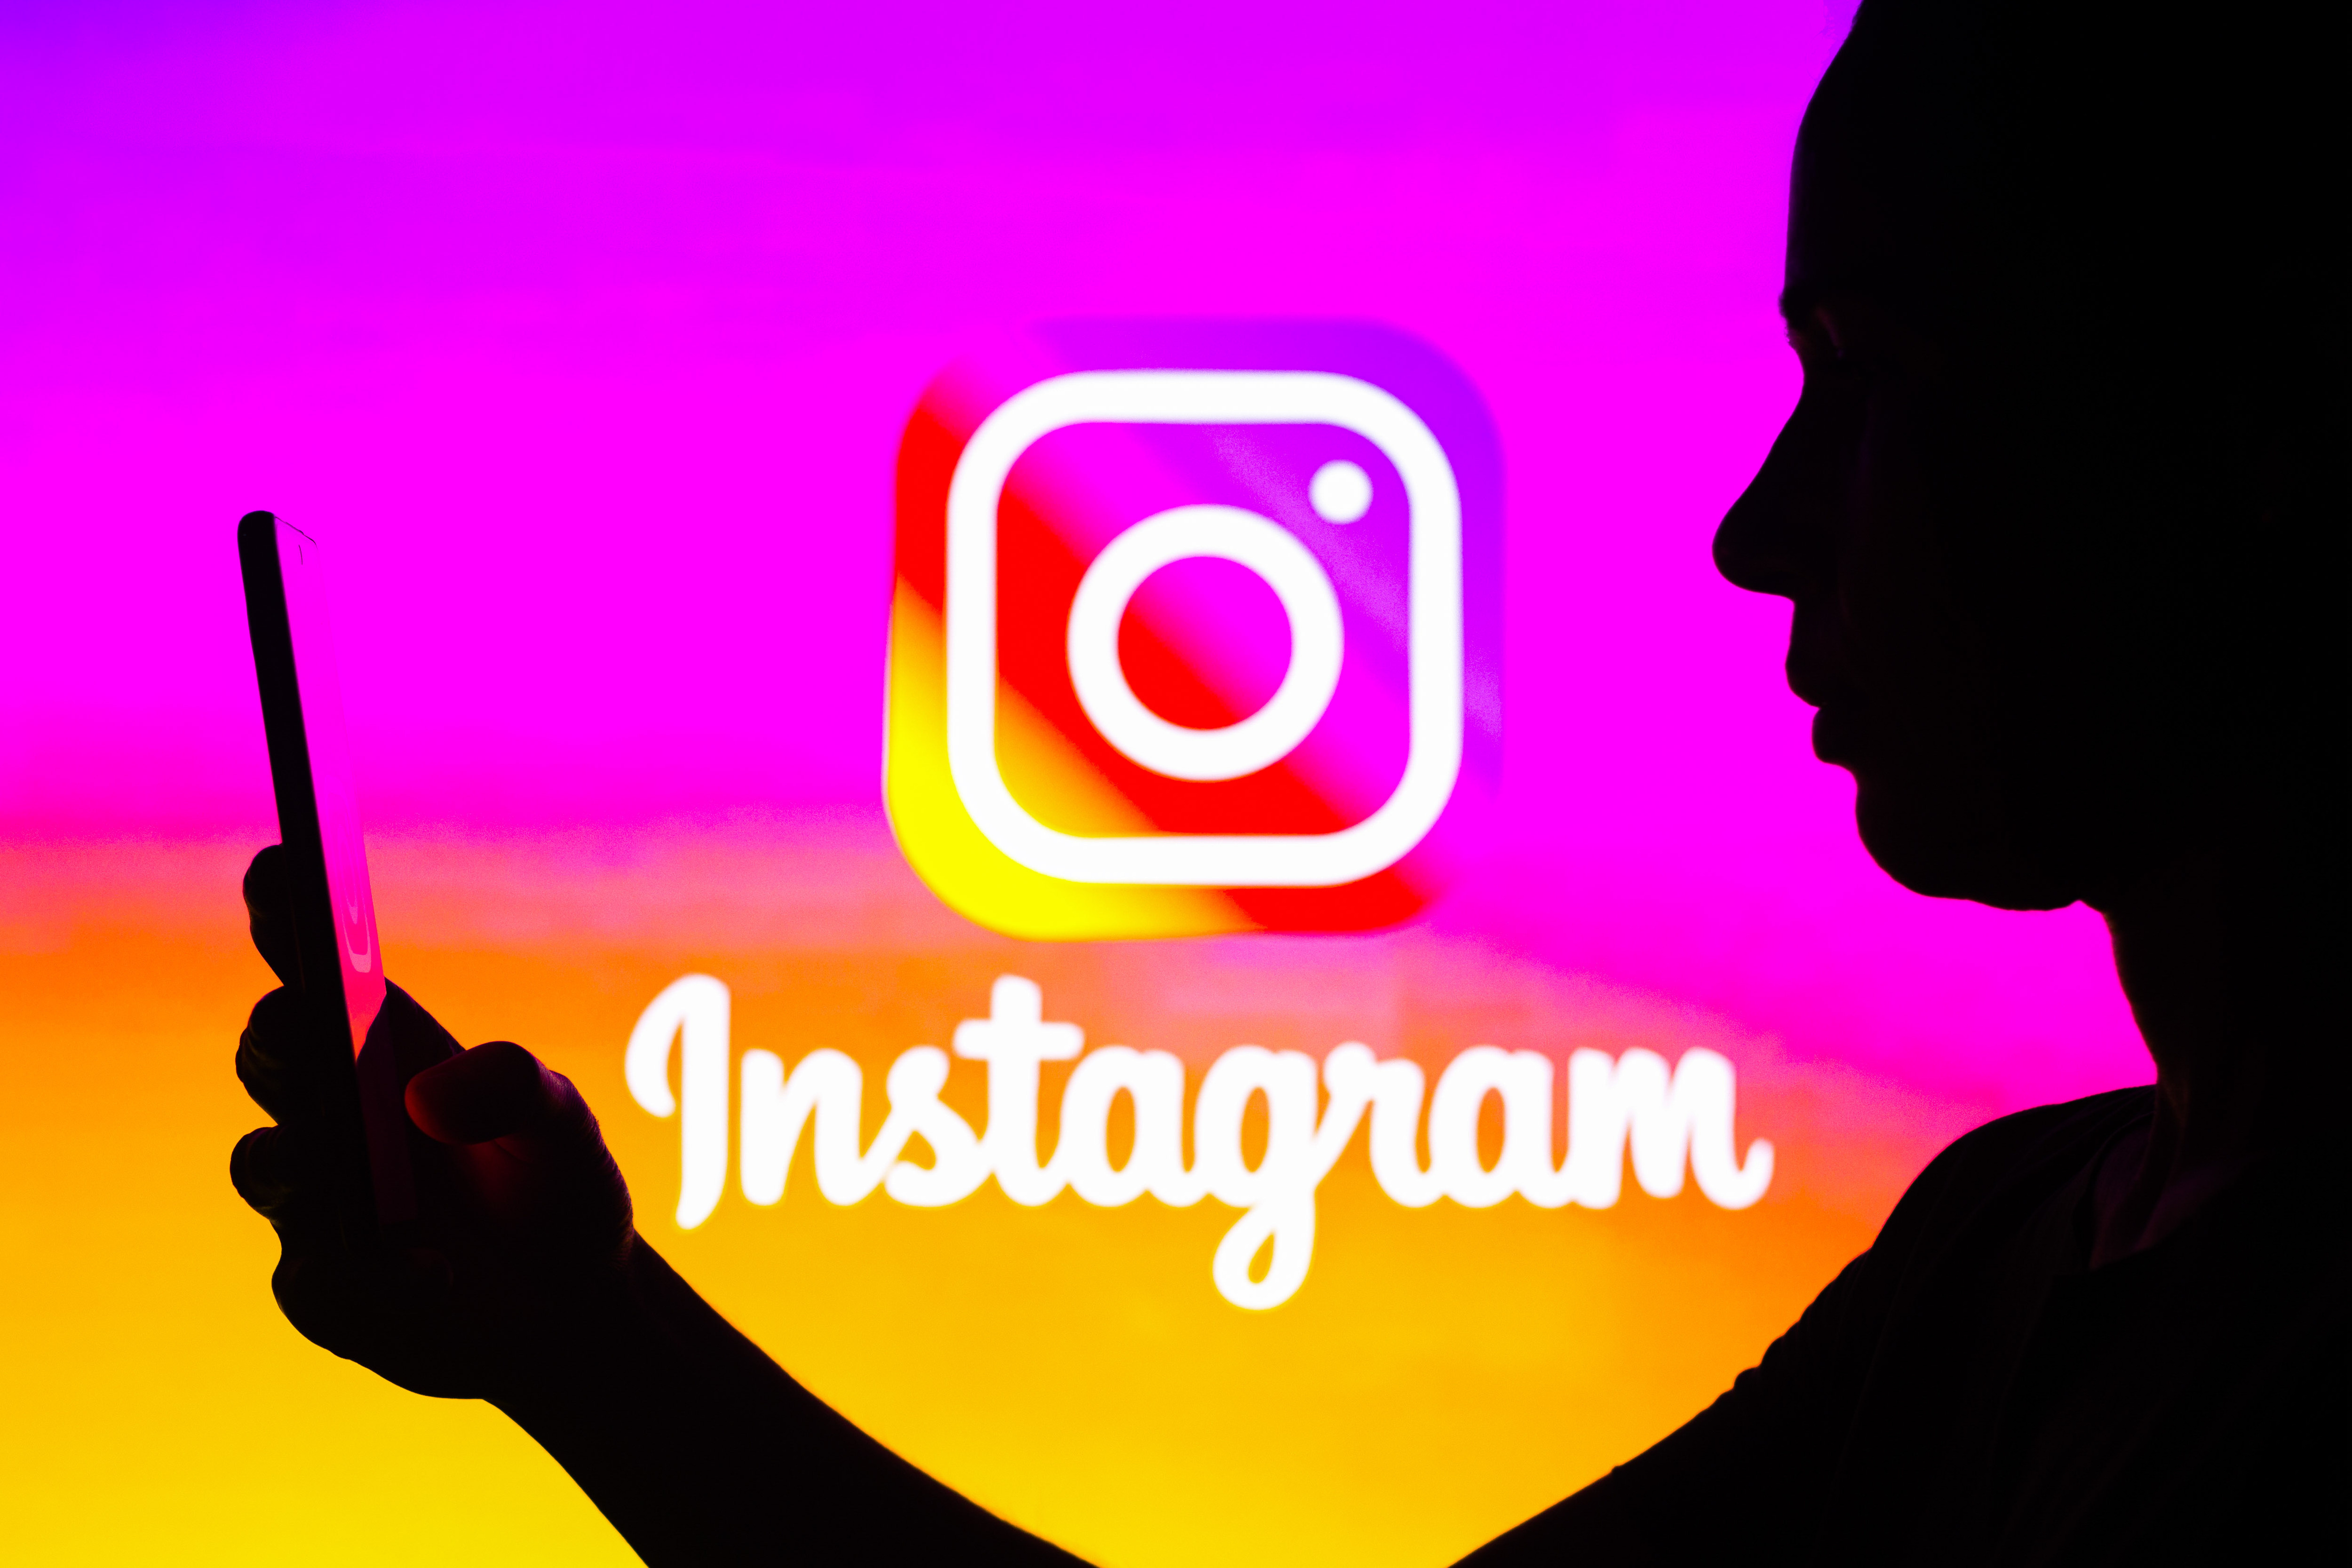 The instagram logo behind the silhouette of a person looking at their phone.